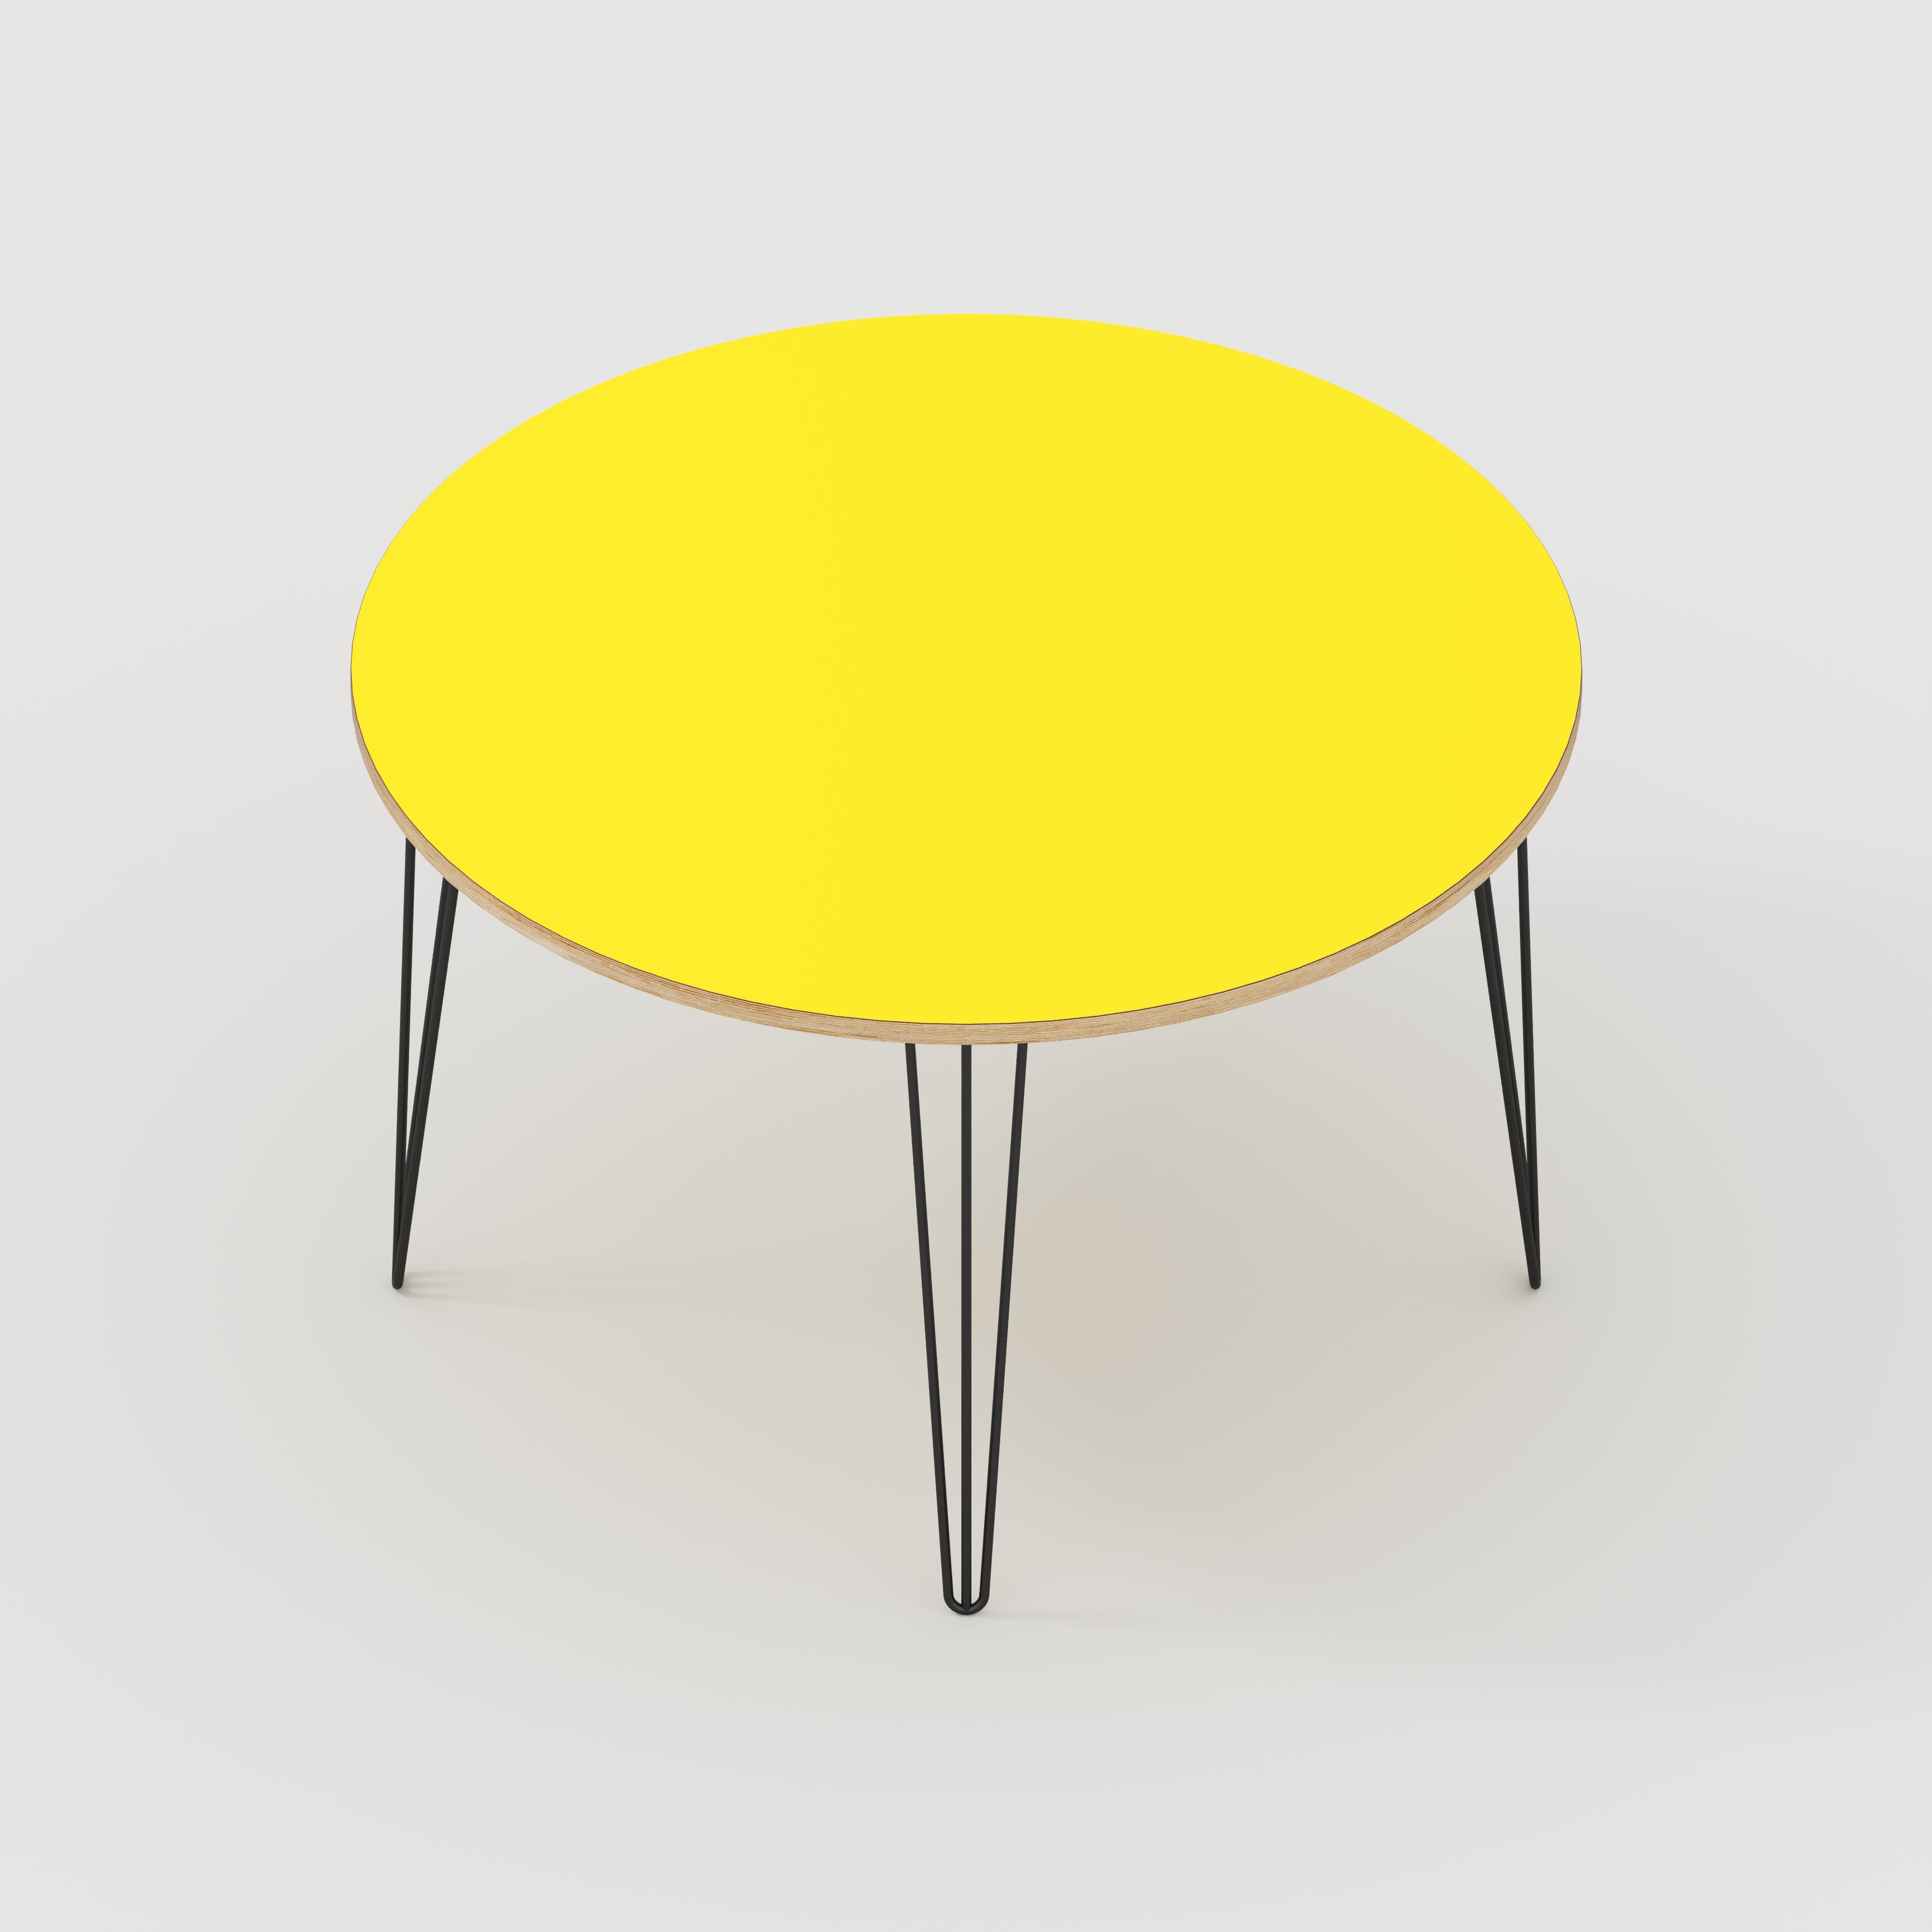 Round Table with Black Hairpin Legs - Formica Chrome Yellow - 1200(dia) x 735(h)